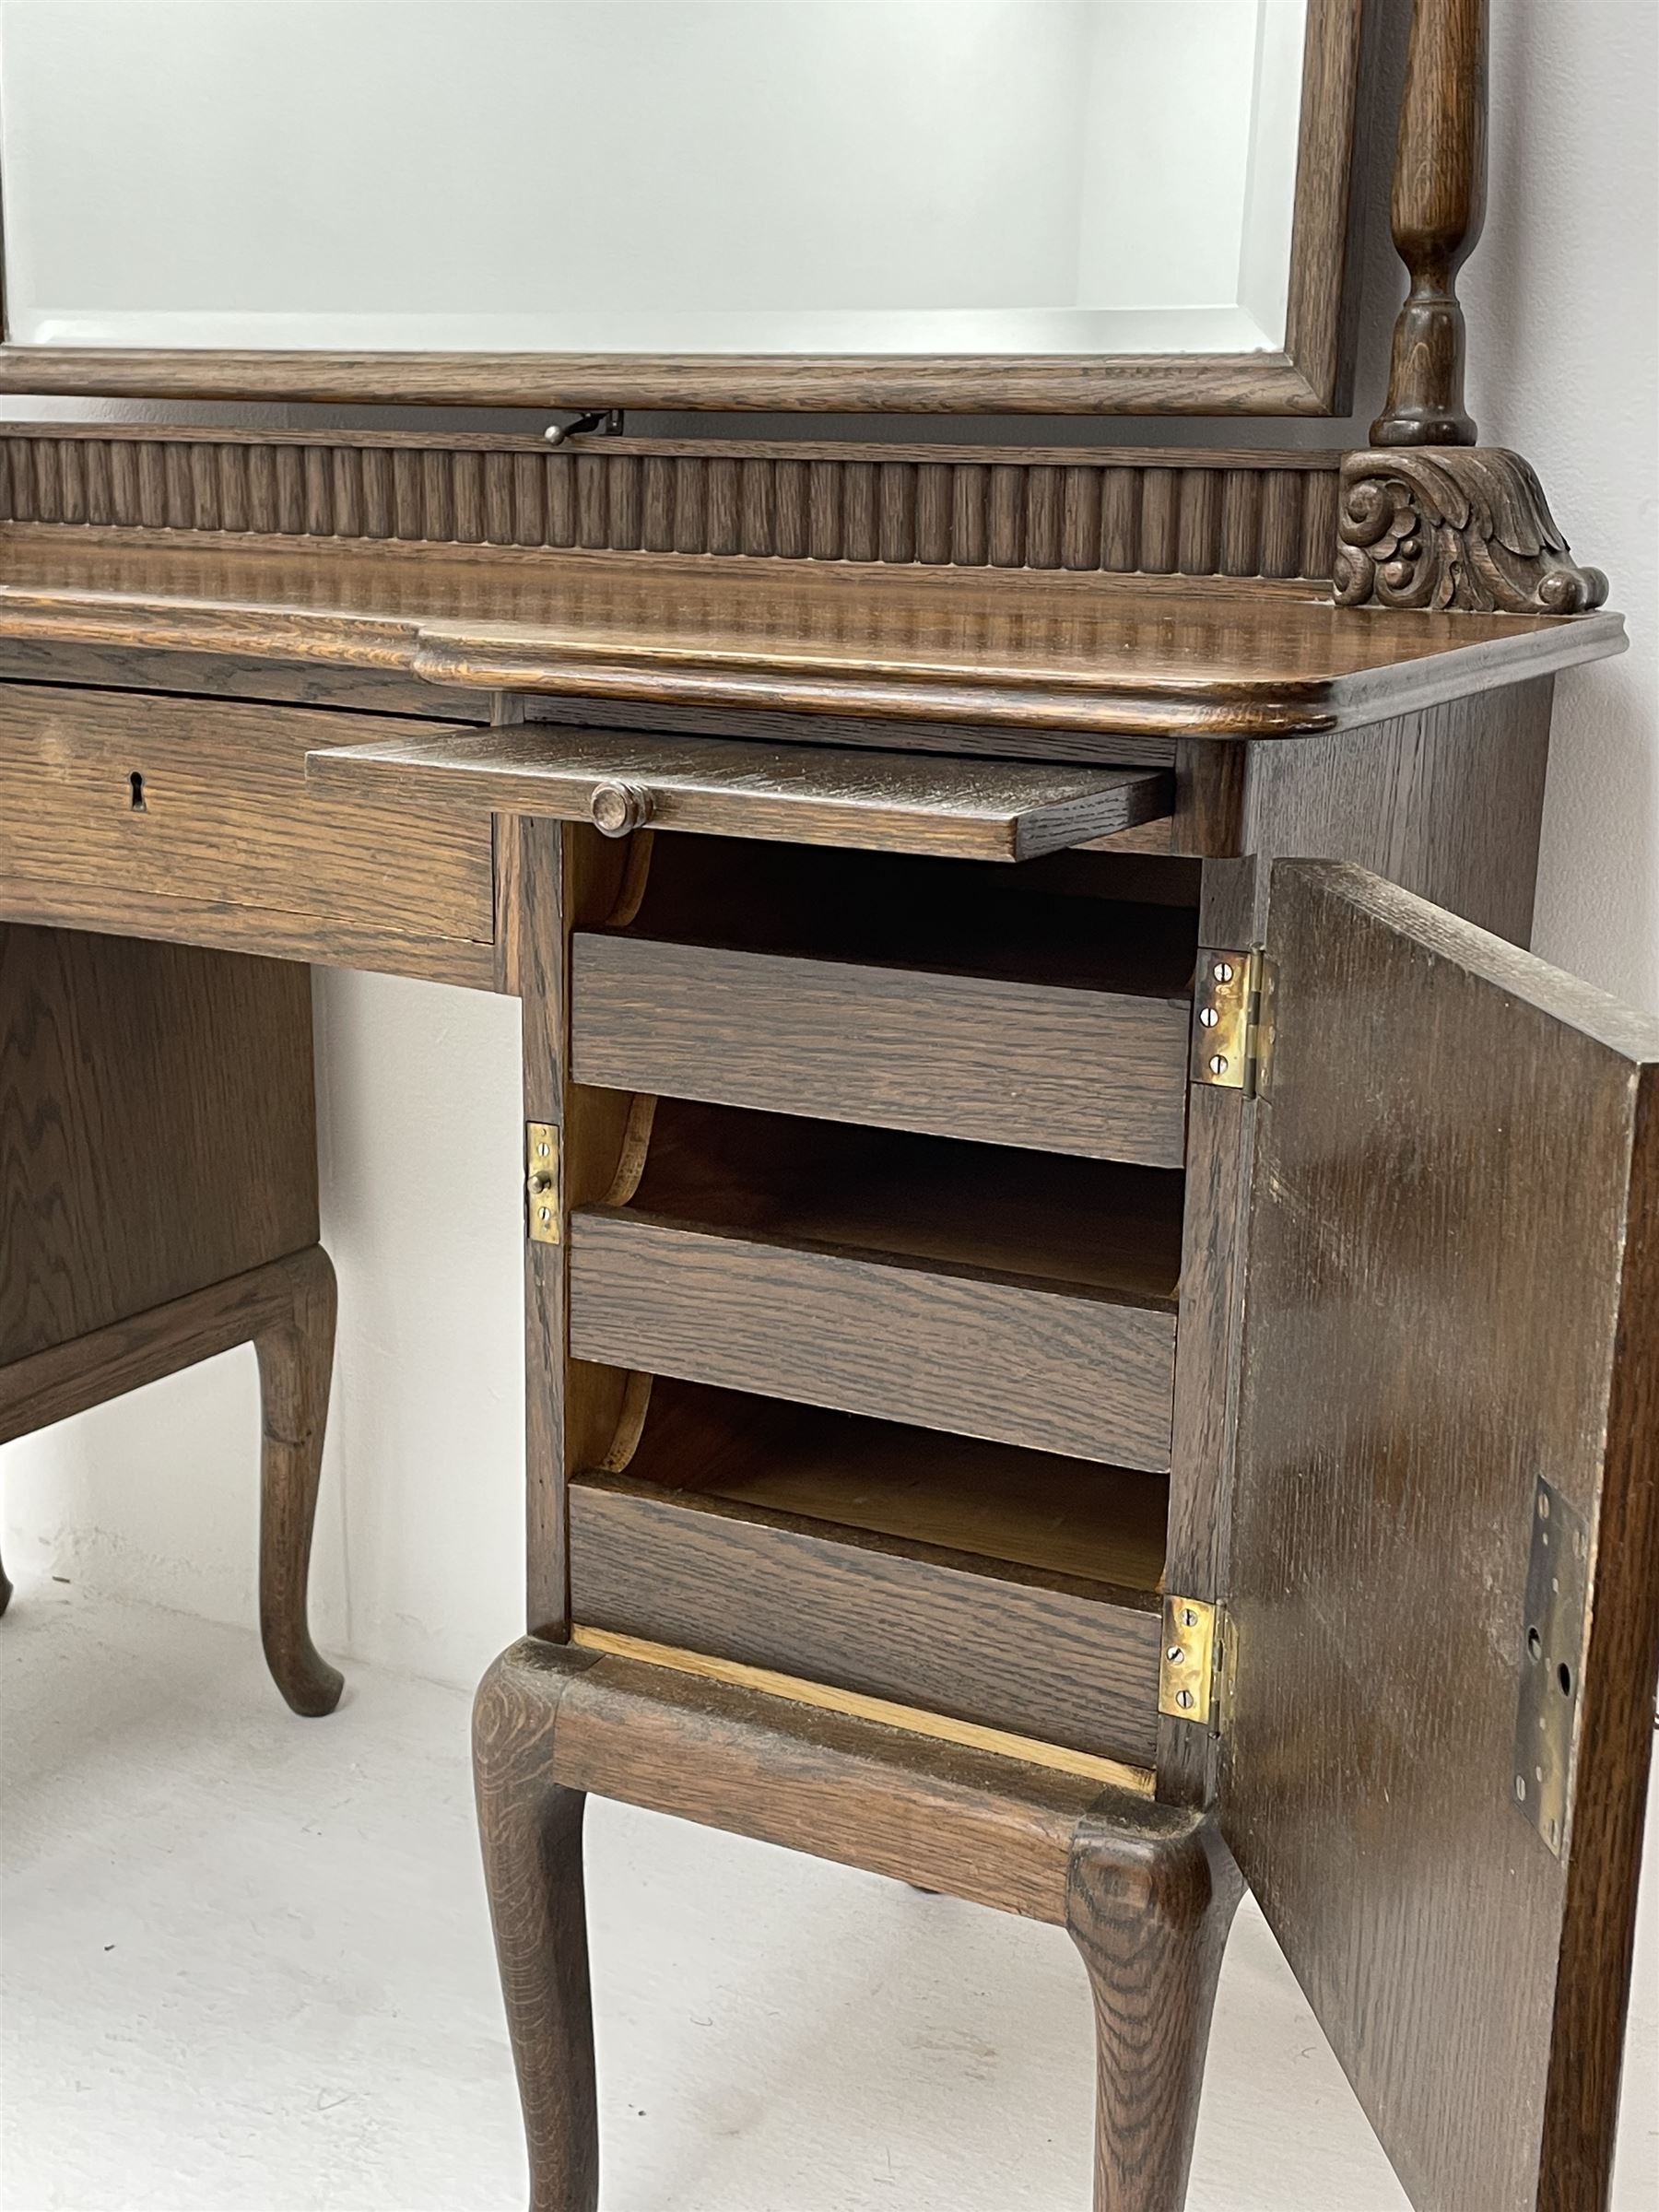 Early 20th century vintage oak dressing table - Image 2 of 4